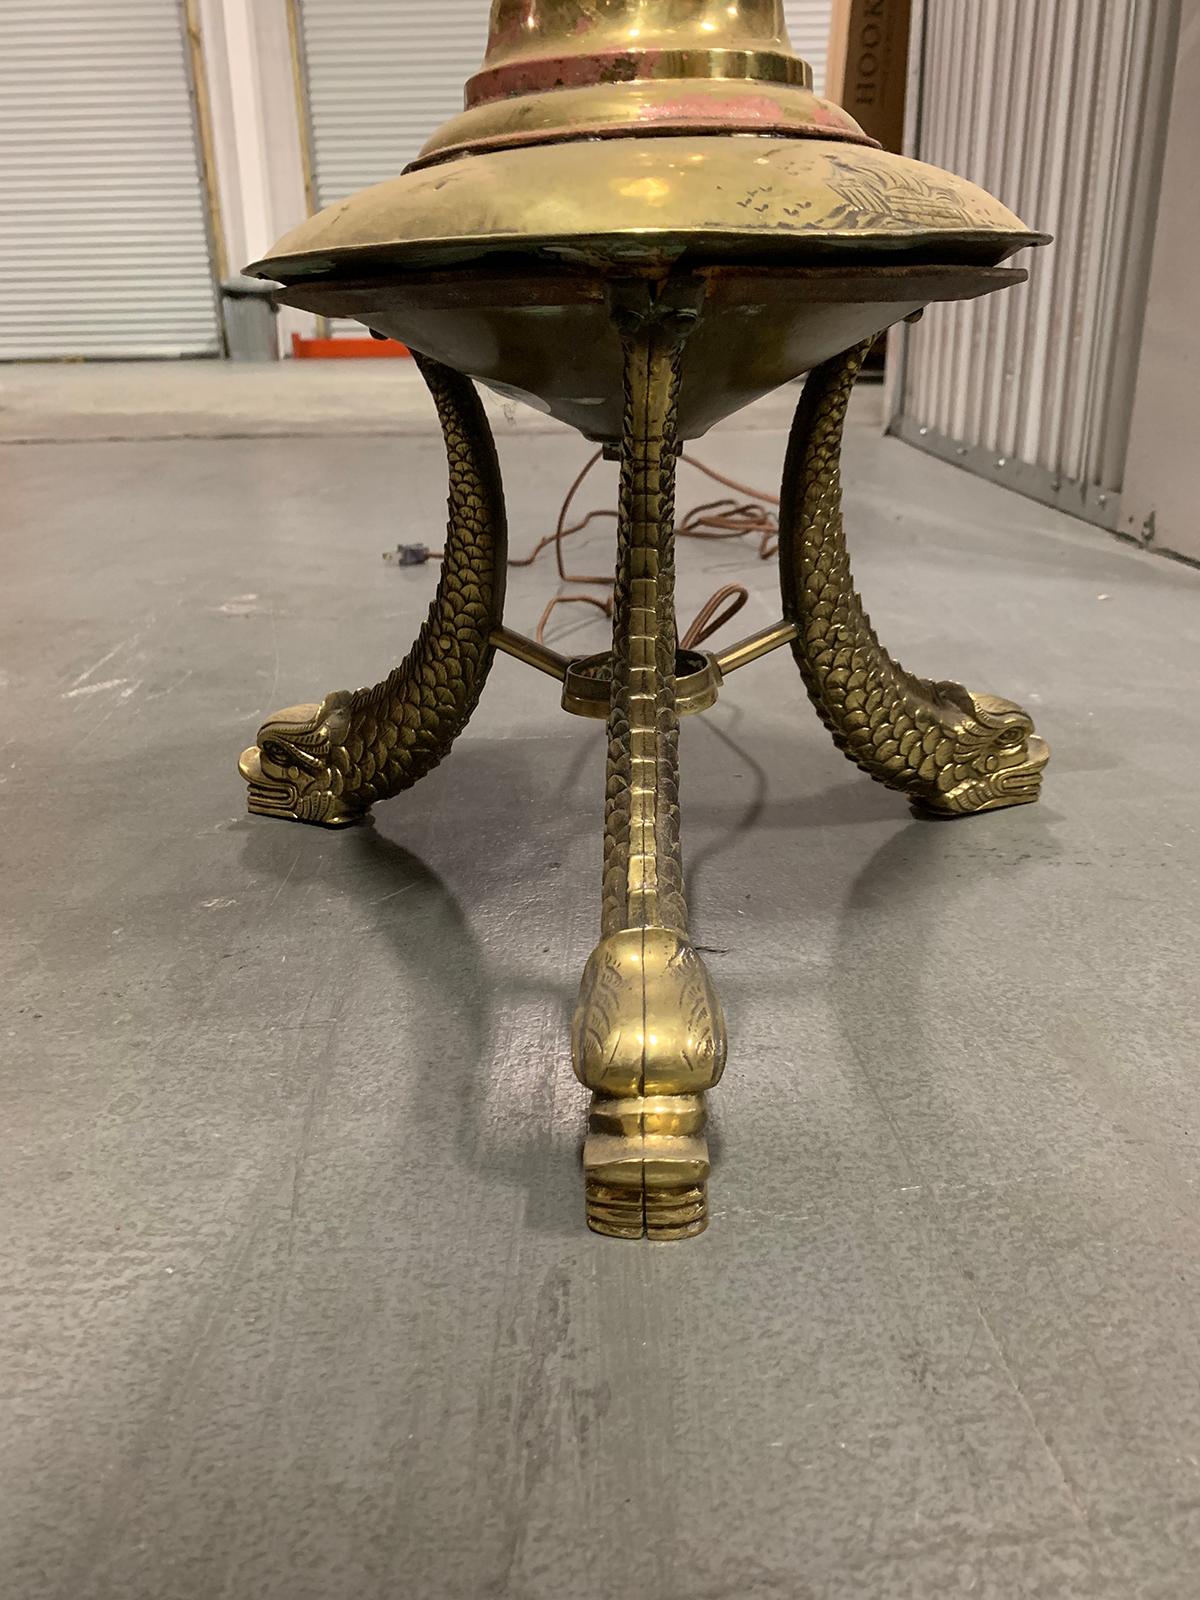 19th-20th Century Continental Brass Torchiere or Floor Lantern For Sale 6